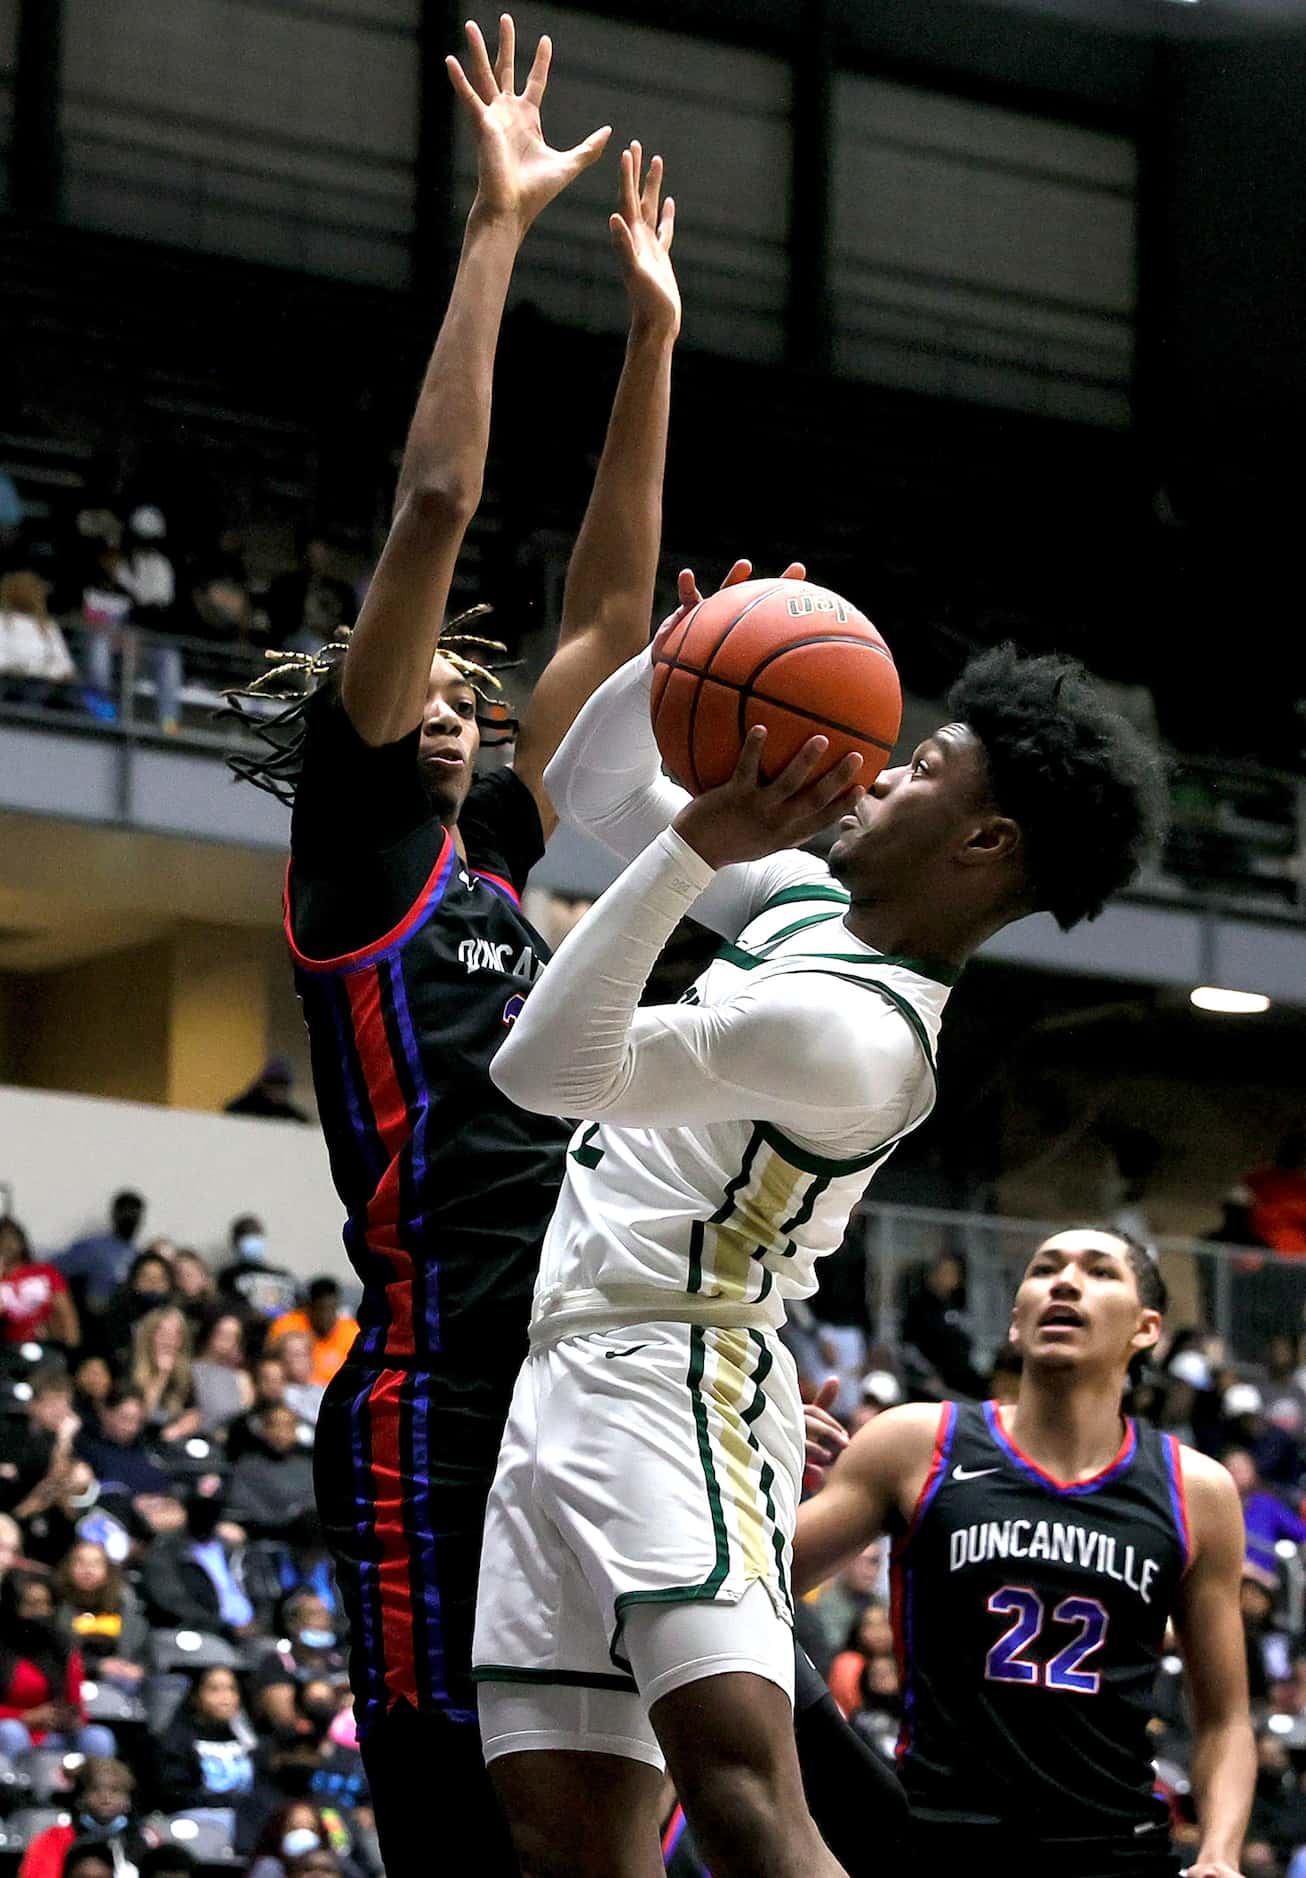 DeSoto guard Evan Phelps (R) tries to get off a difficult shot over Duncanville forward...